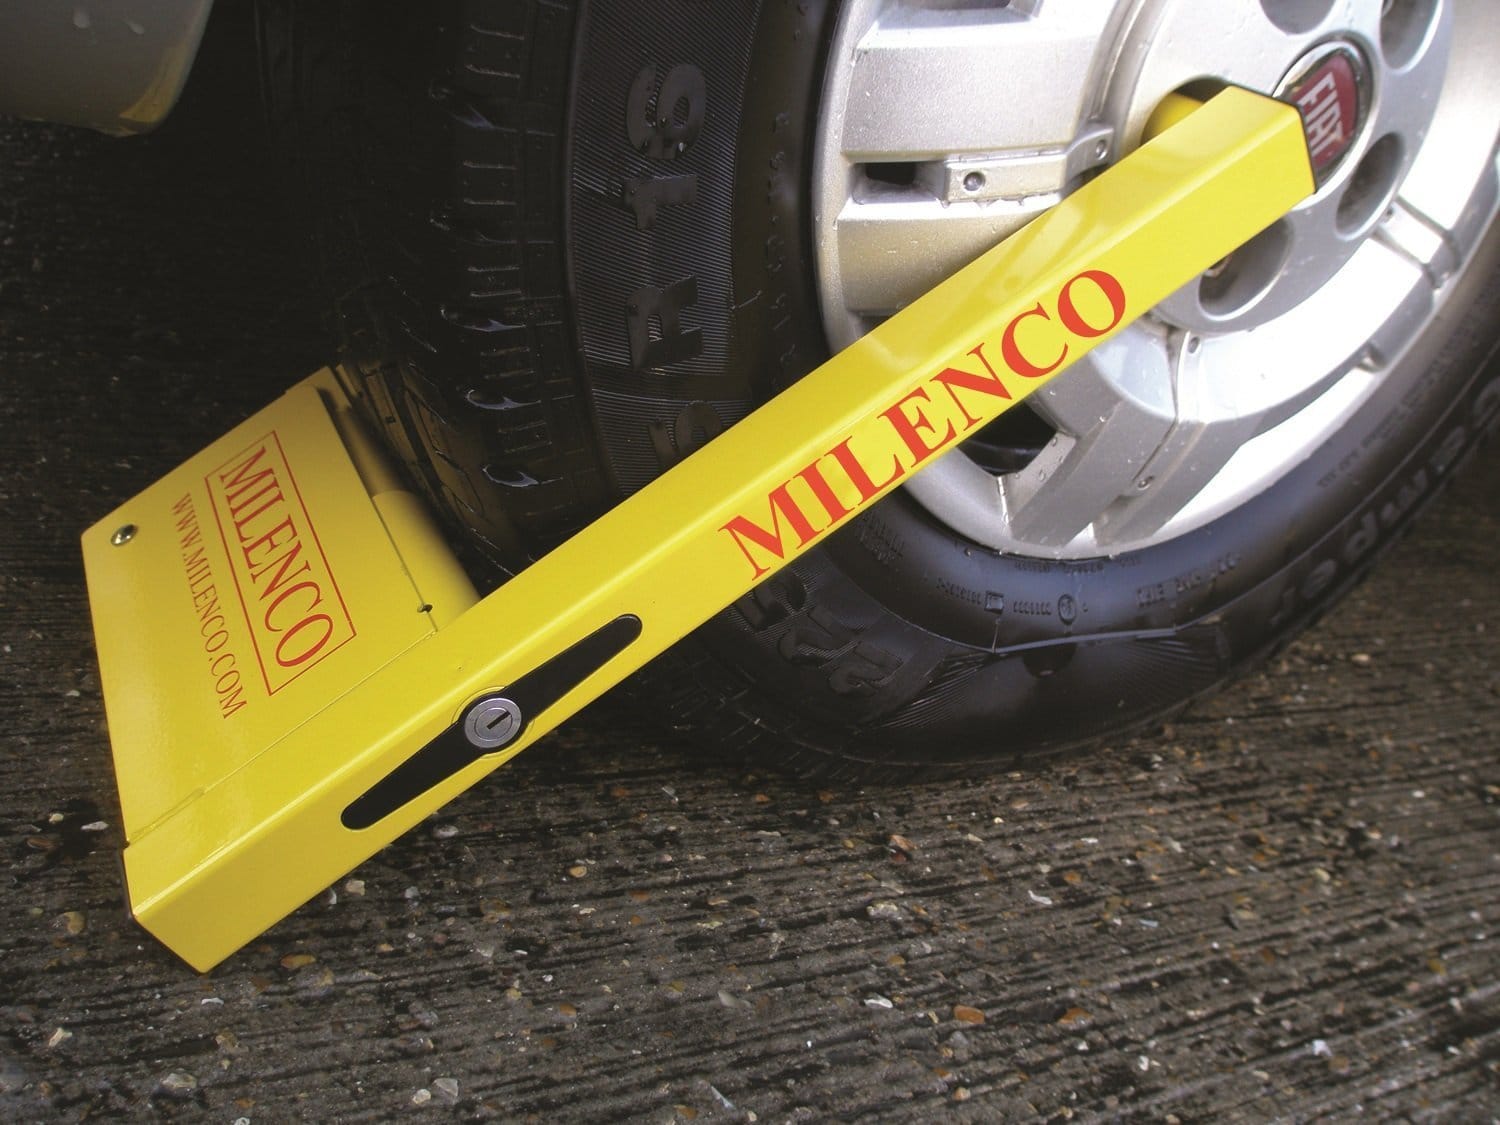 Review of Milenco Compact Wheel Clamp